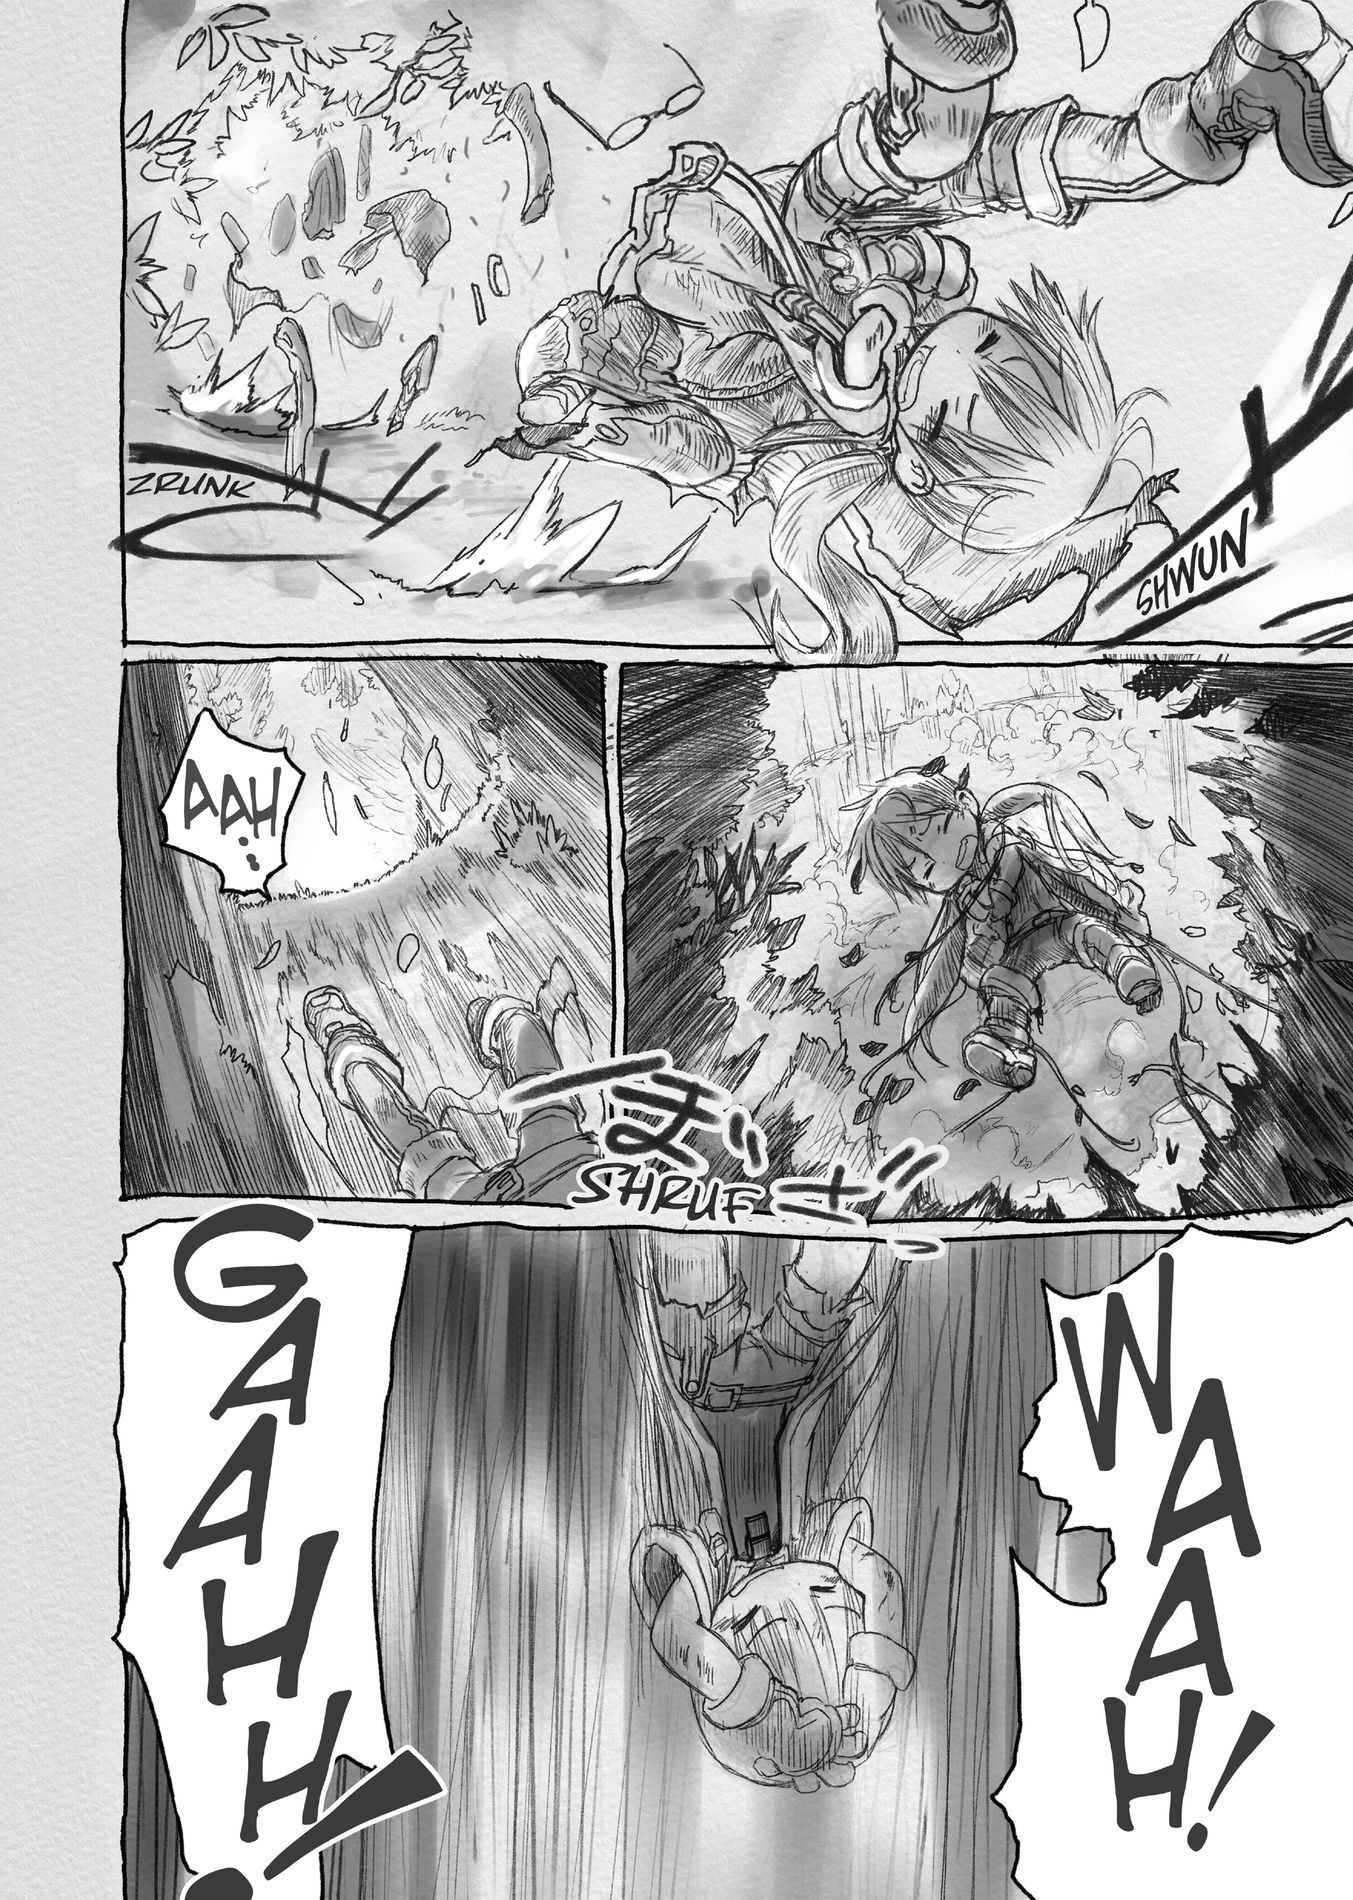 Read Manga Made In Abyss - Chapter 2